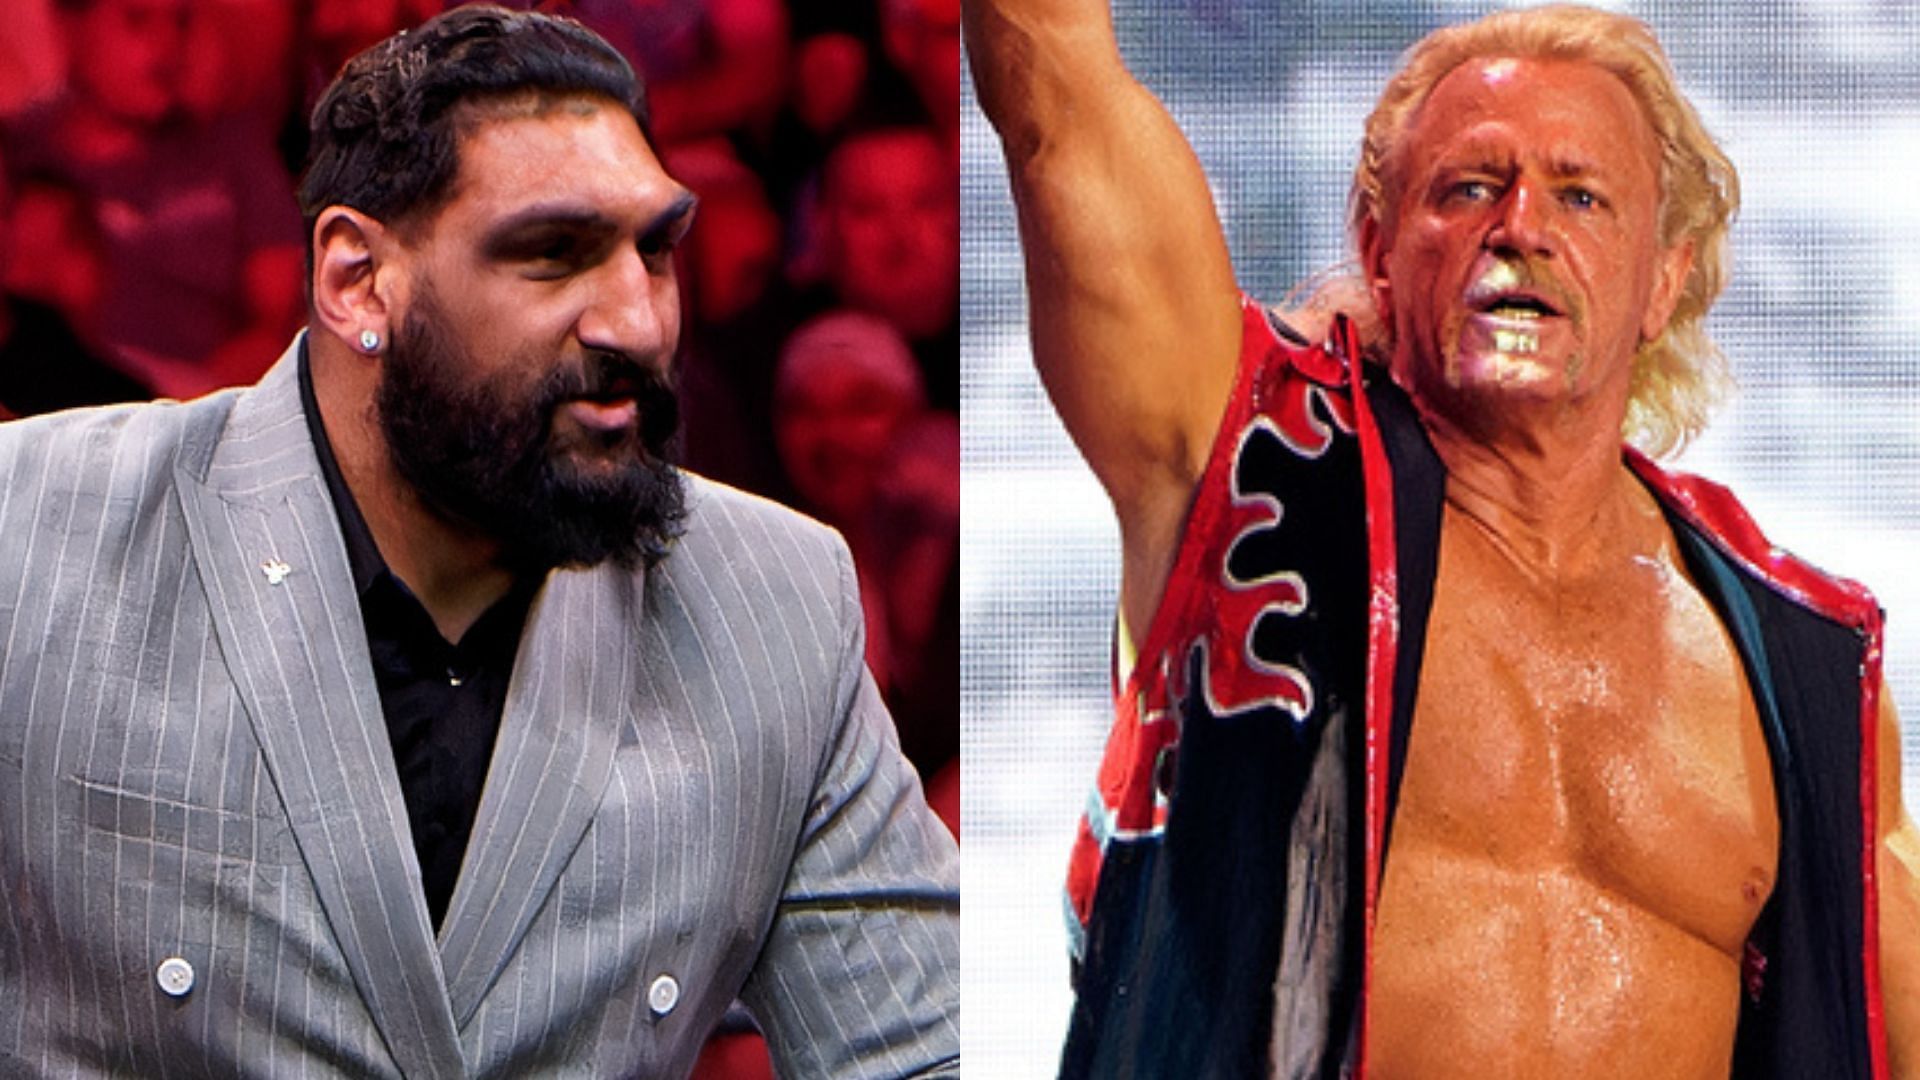 Satnam Singh has opened up about his time with Jeff Jarrett